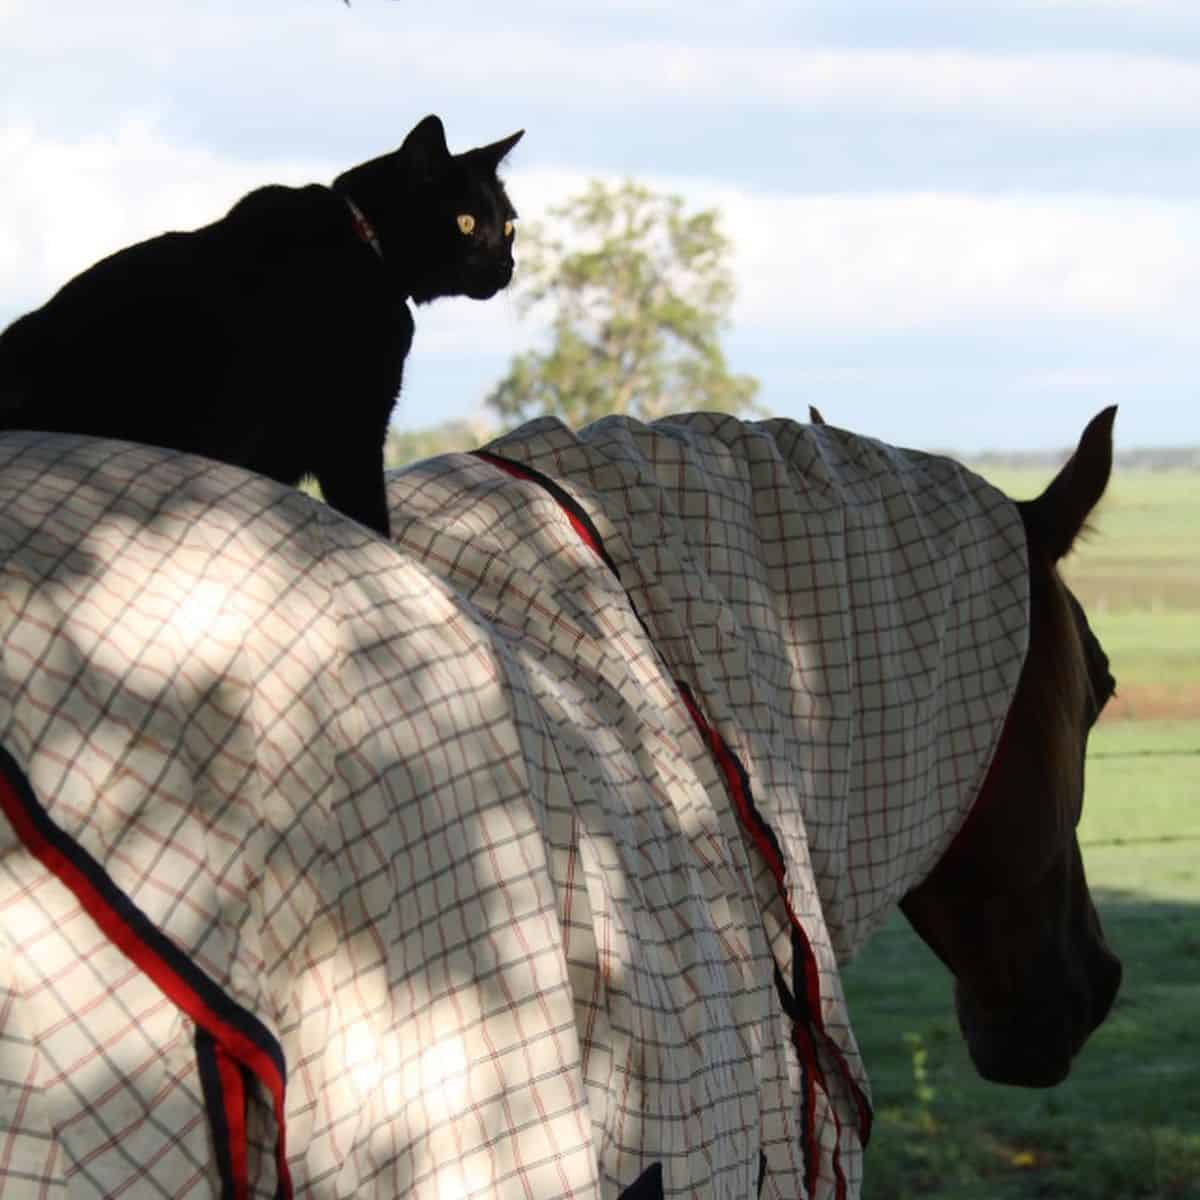 photo of a black cat sitting on horse